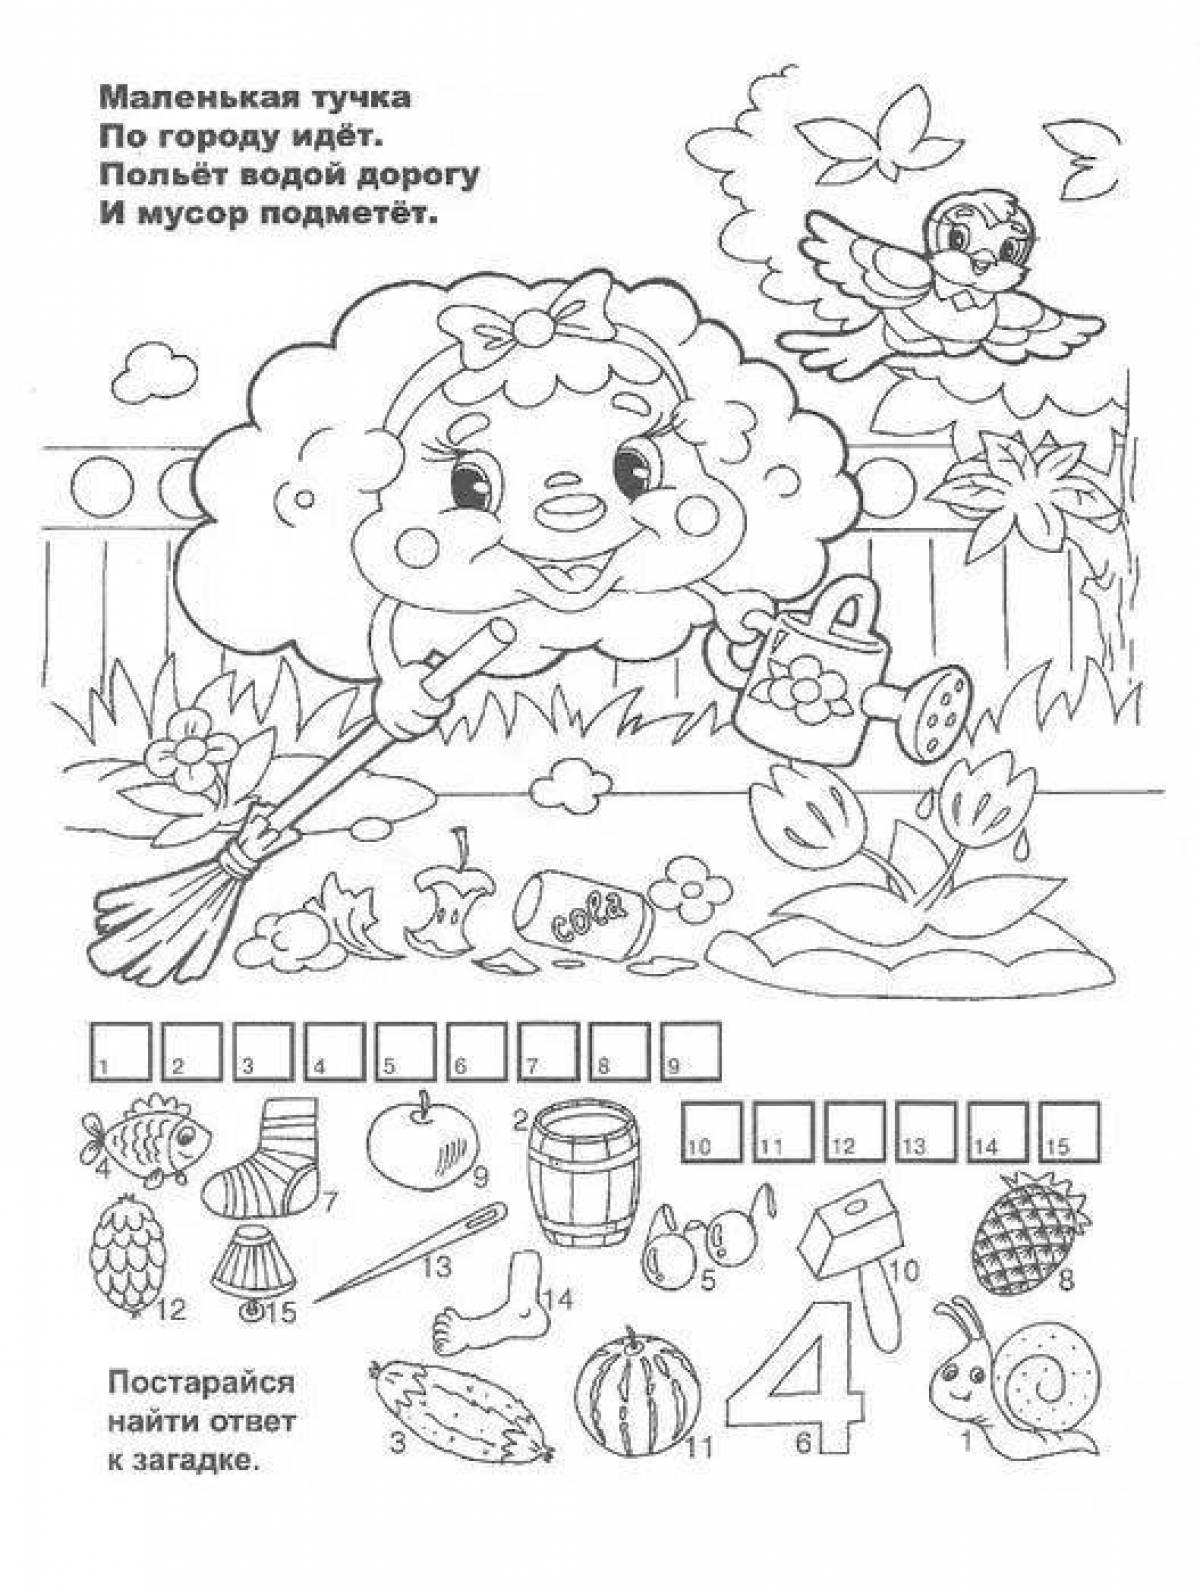 Inviting puzzle coloring book